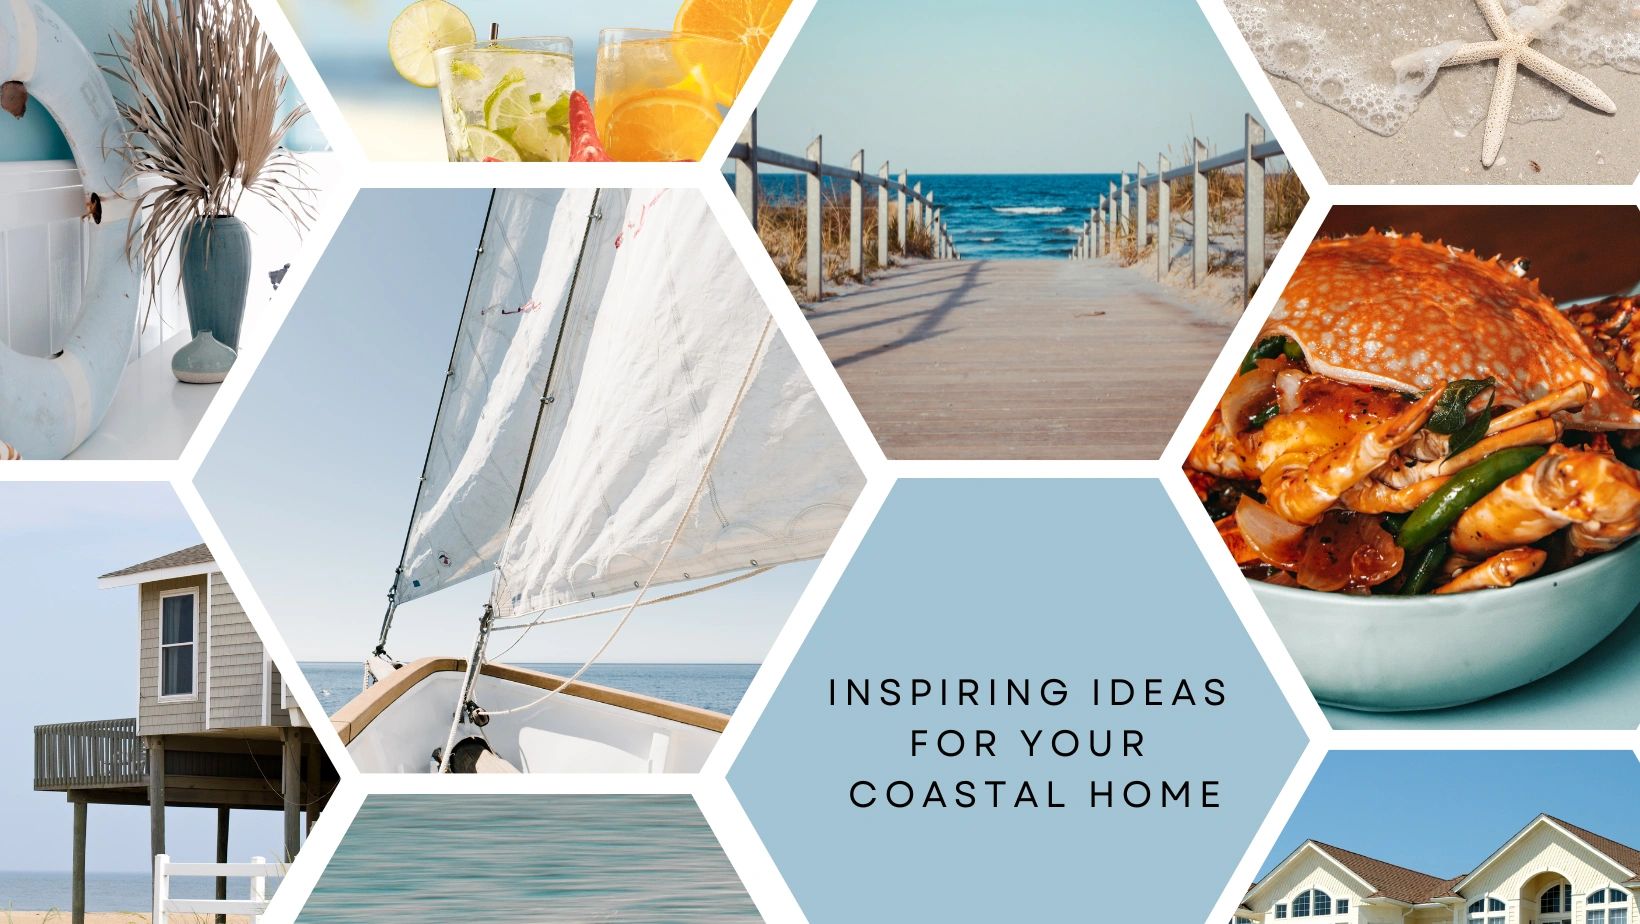 https://img1.wsimg.com/isteam/ip/1b5b2584-fcf9-4d7b-ab2c-019b5d24661d/Inspiring%20Ideas%20for%20Your%20Coastal%20Home.png